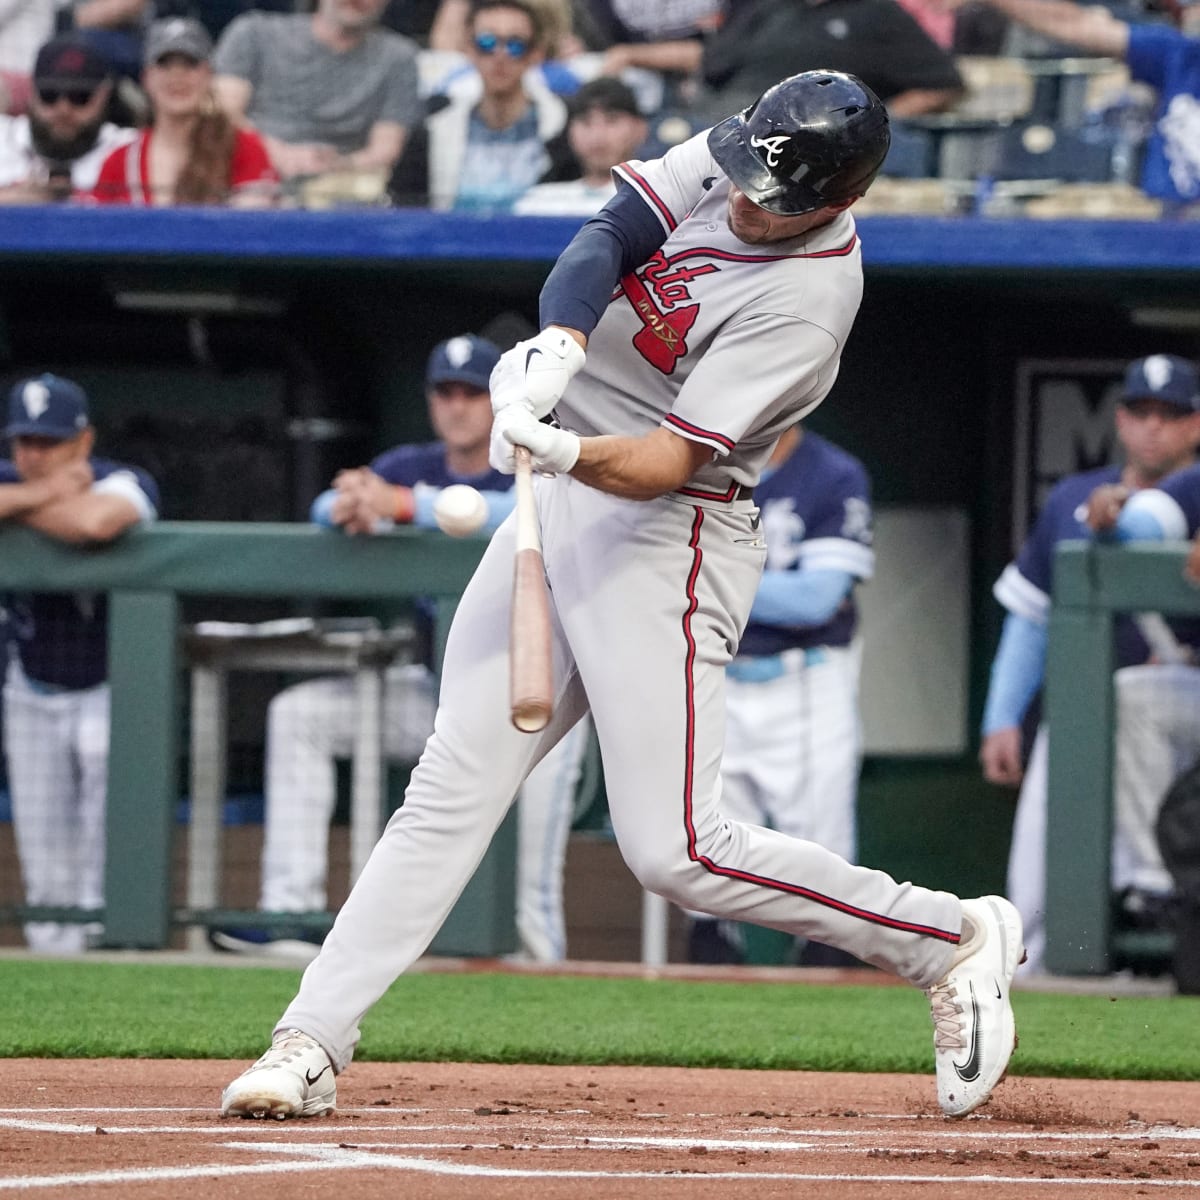 Olson's 2-run HR in 1st helps Braves overpower Red Sox 9-3 - The